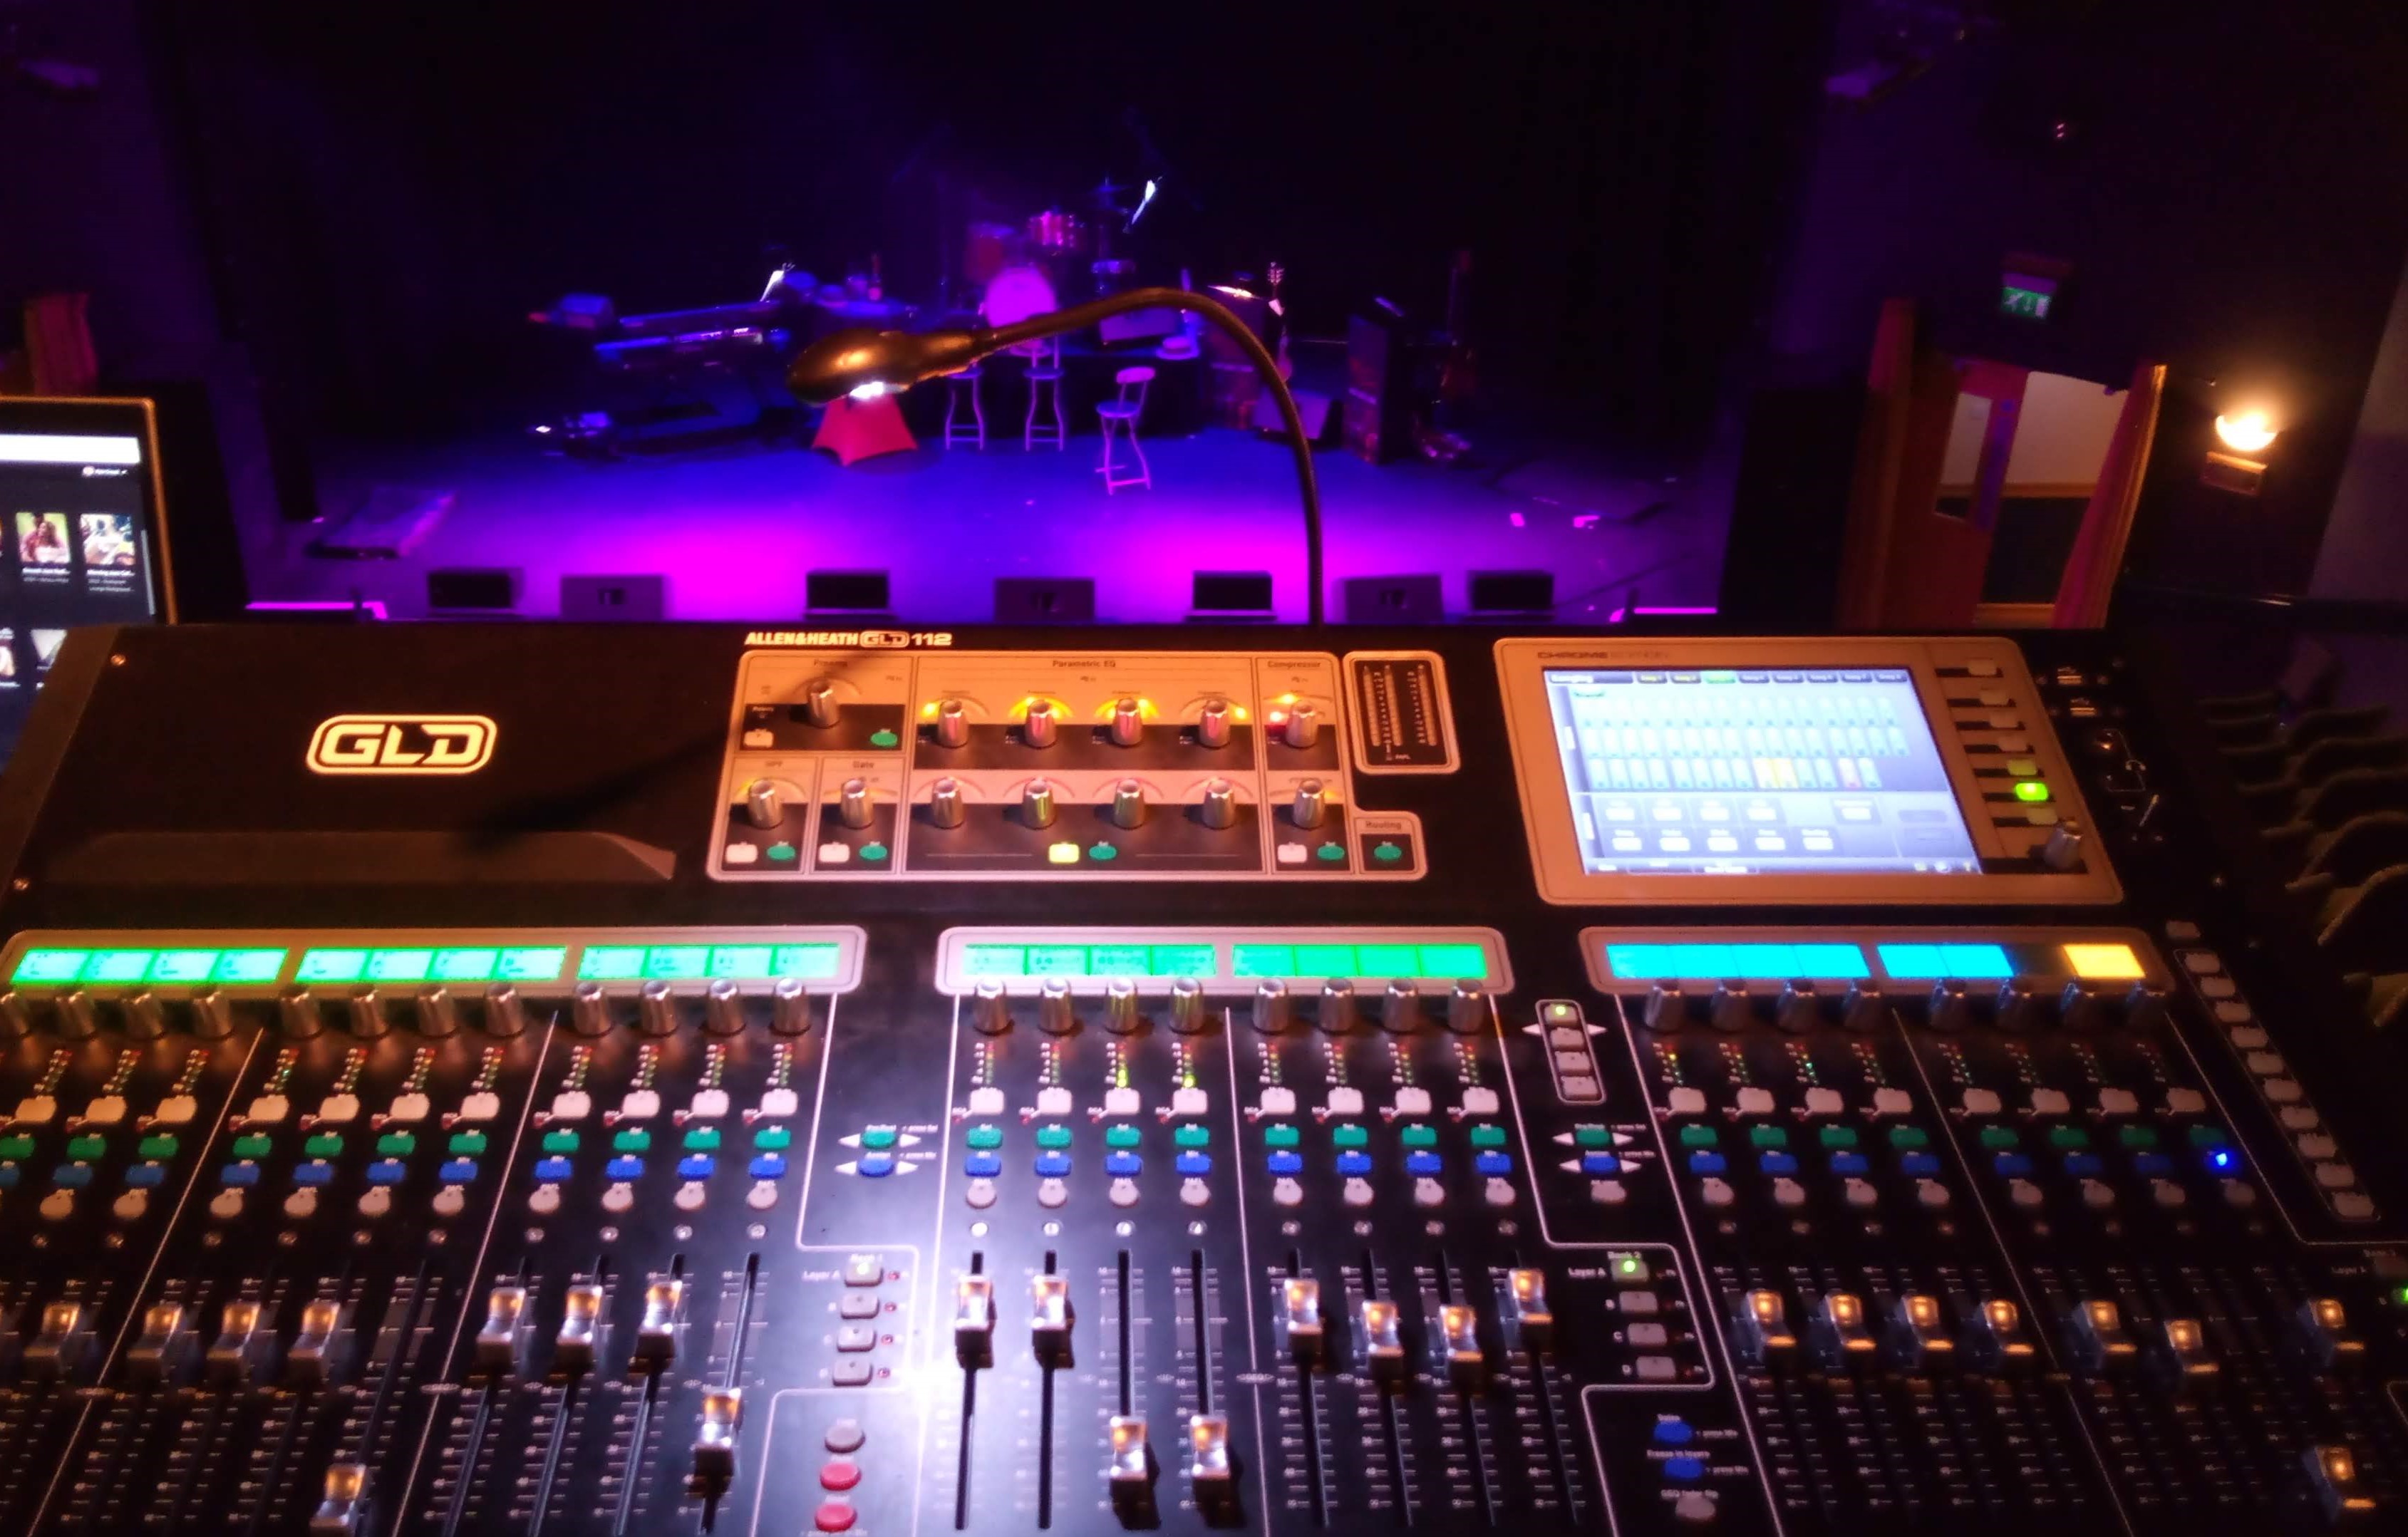 In the foreground, a large sound mixing desk with lots of sliders, buttons, knobs and screens.  In the background, a dimly lit stage: several bar stools and a large drum kit are just visible.